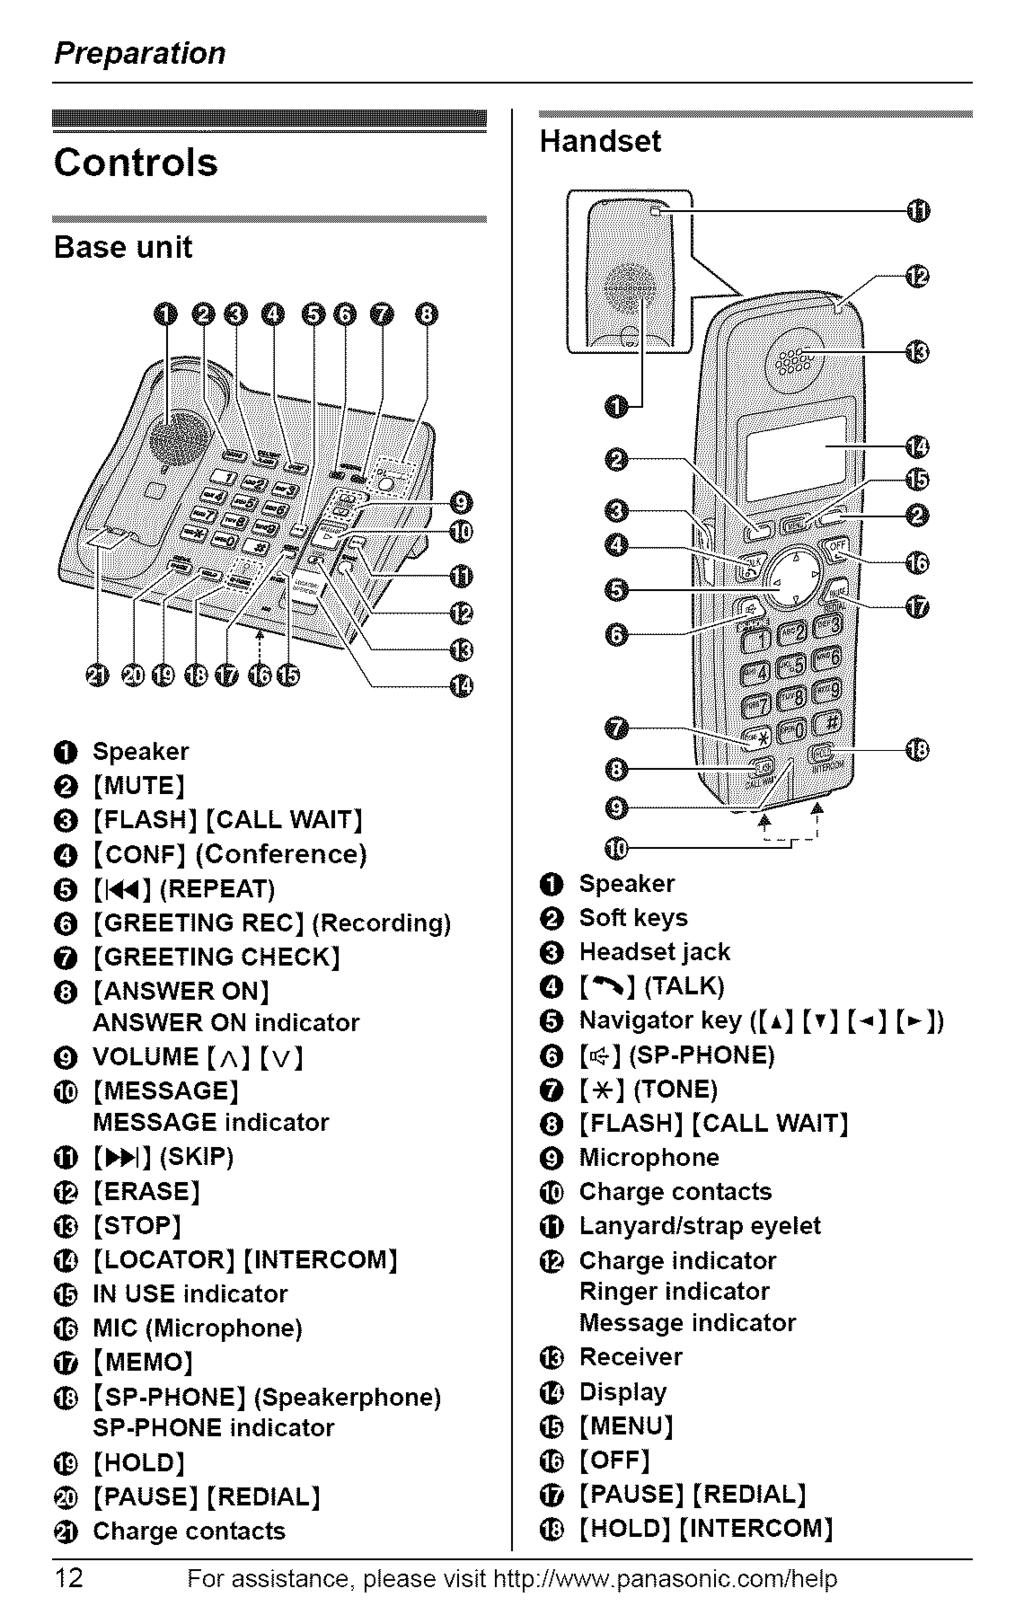 Preparation Controls Base unit Handset @ O _) Speaker [MUTE] O [FLASH] [CALL WAIT] Q [CONF] (Conference) _l [1_] (REPEAT) O Q [GREETING REC] (Recording) _) O [GREETING CHECK] O O [ANSWER ON] Q ANSWER